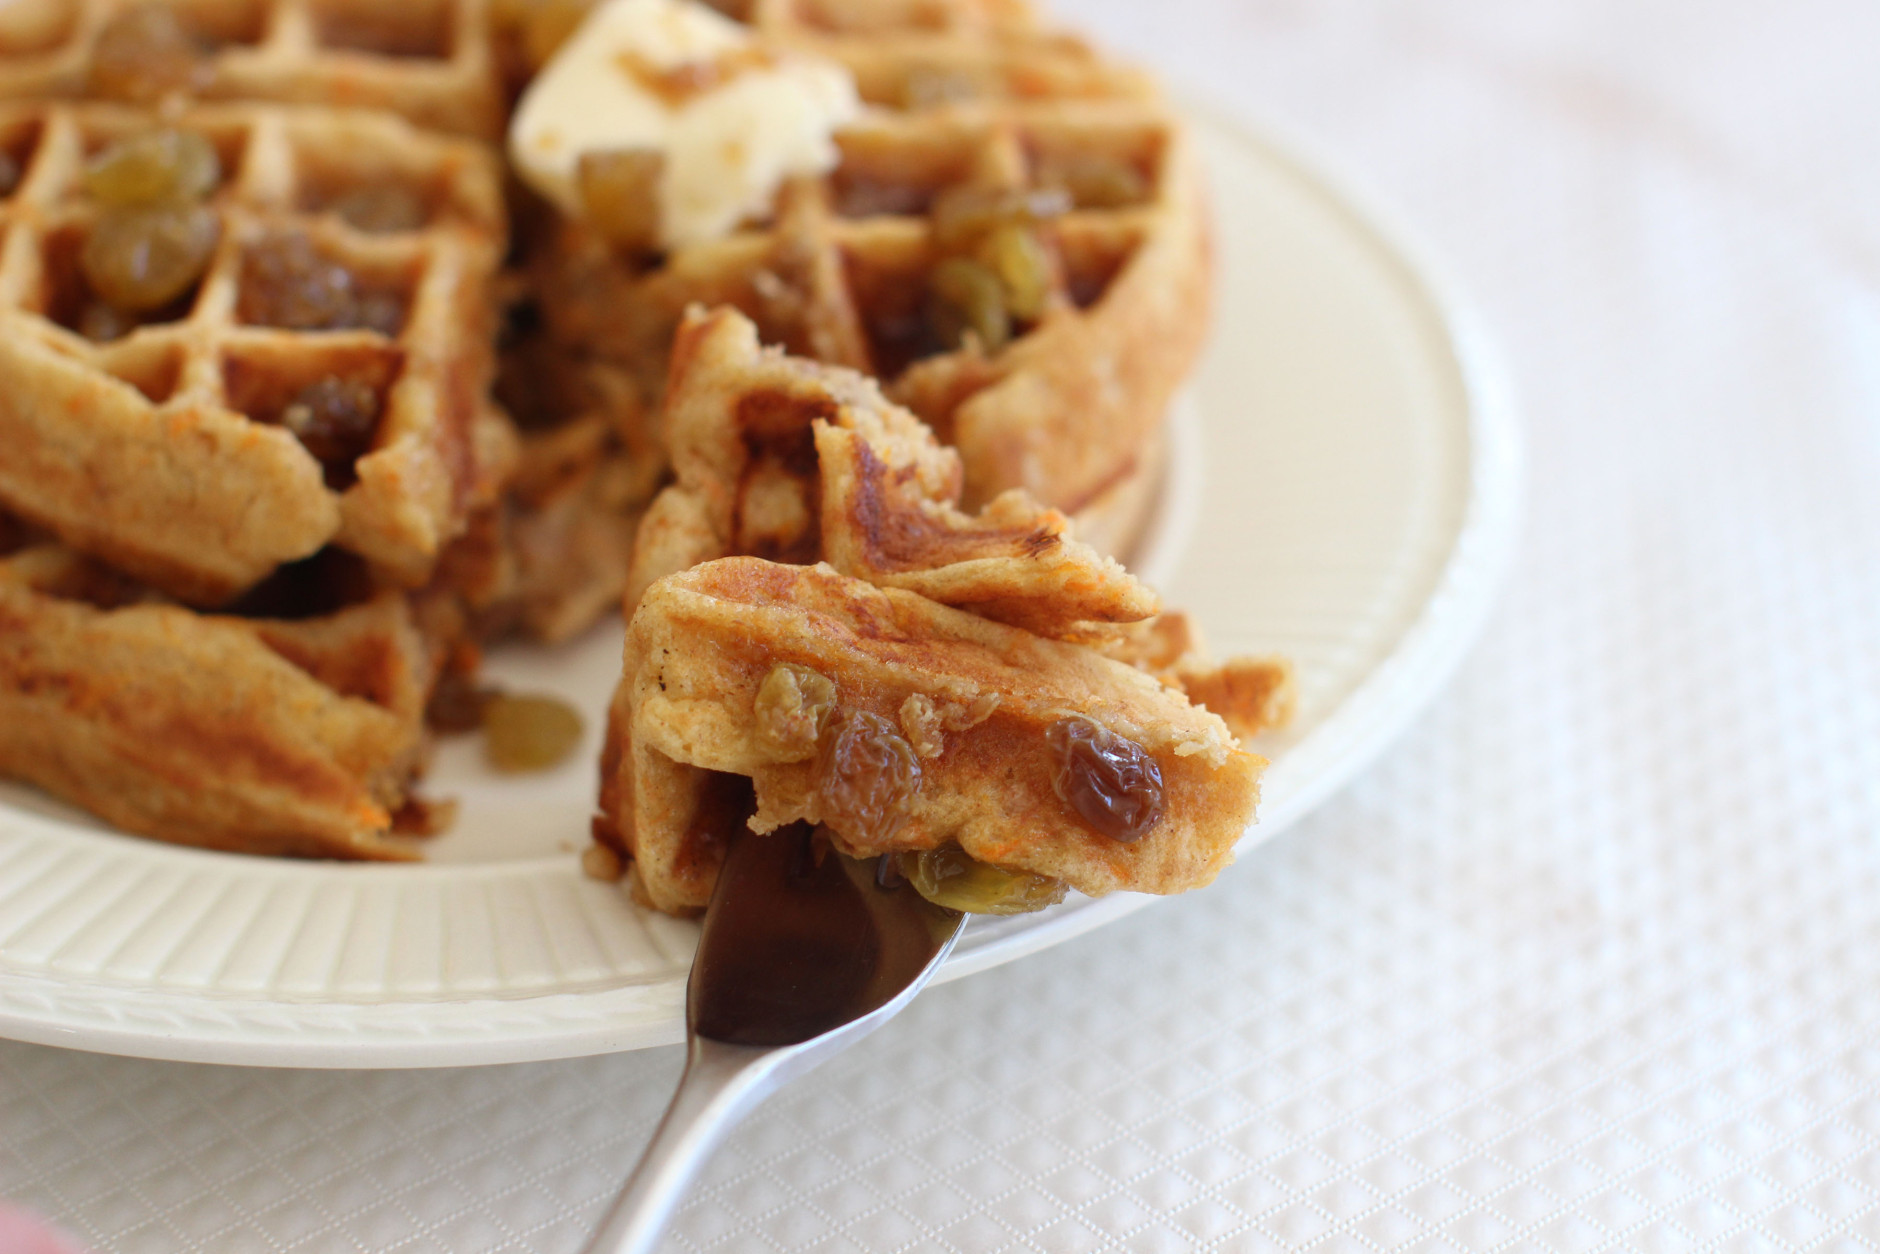 This Feb. 16, 2015 photo shows carrot cake waffles with ginger raisin syrup in Concord, N.H. (AP Photo/Matthew Mead)